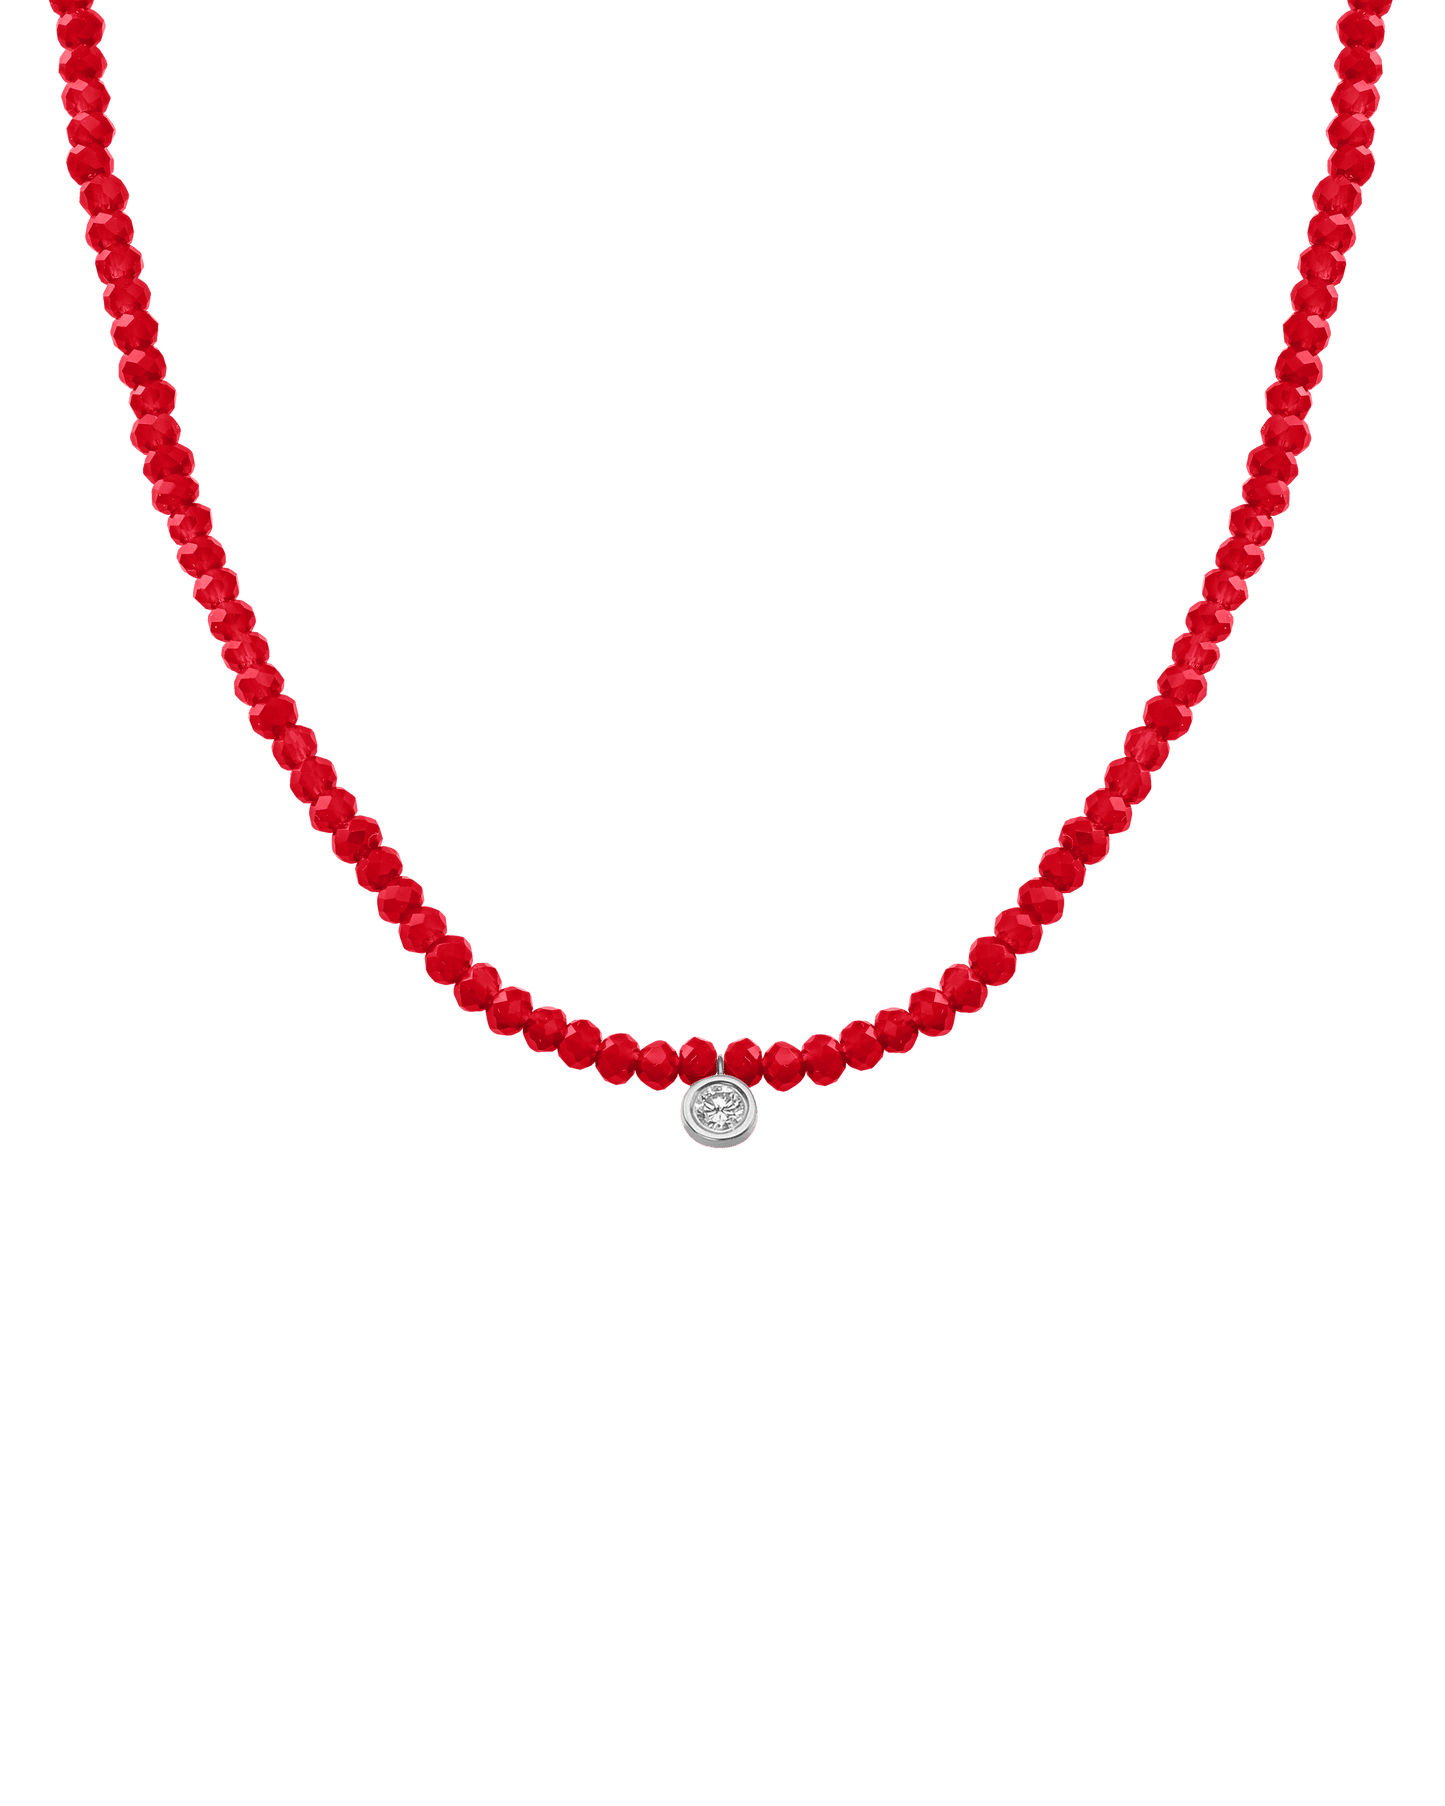 The Gemstone & Diamond Necklace - 14K White Gold Necklaces 14K Solid Gold Natural Red Jade Large: 0.1ct 14"